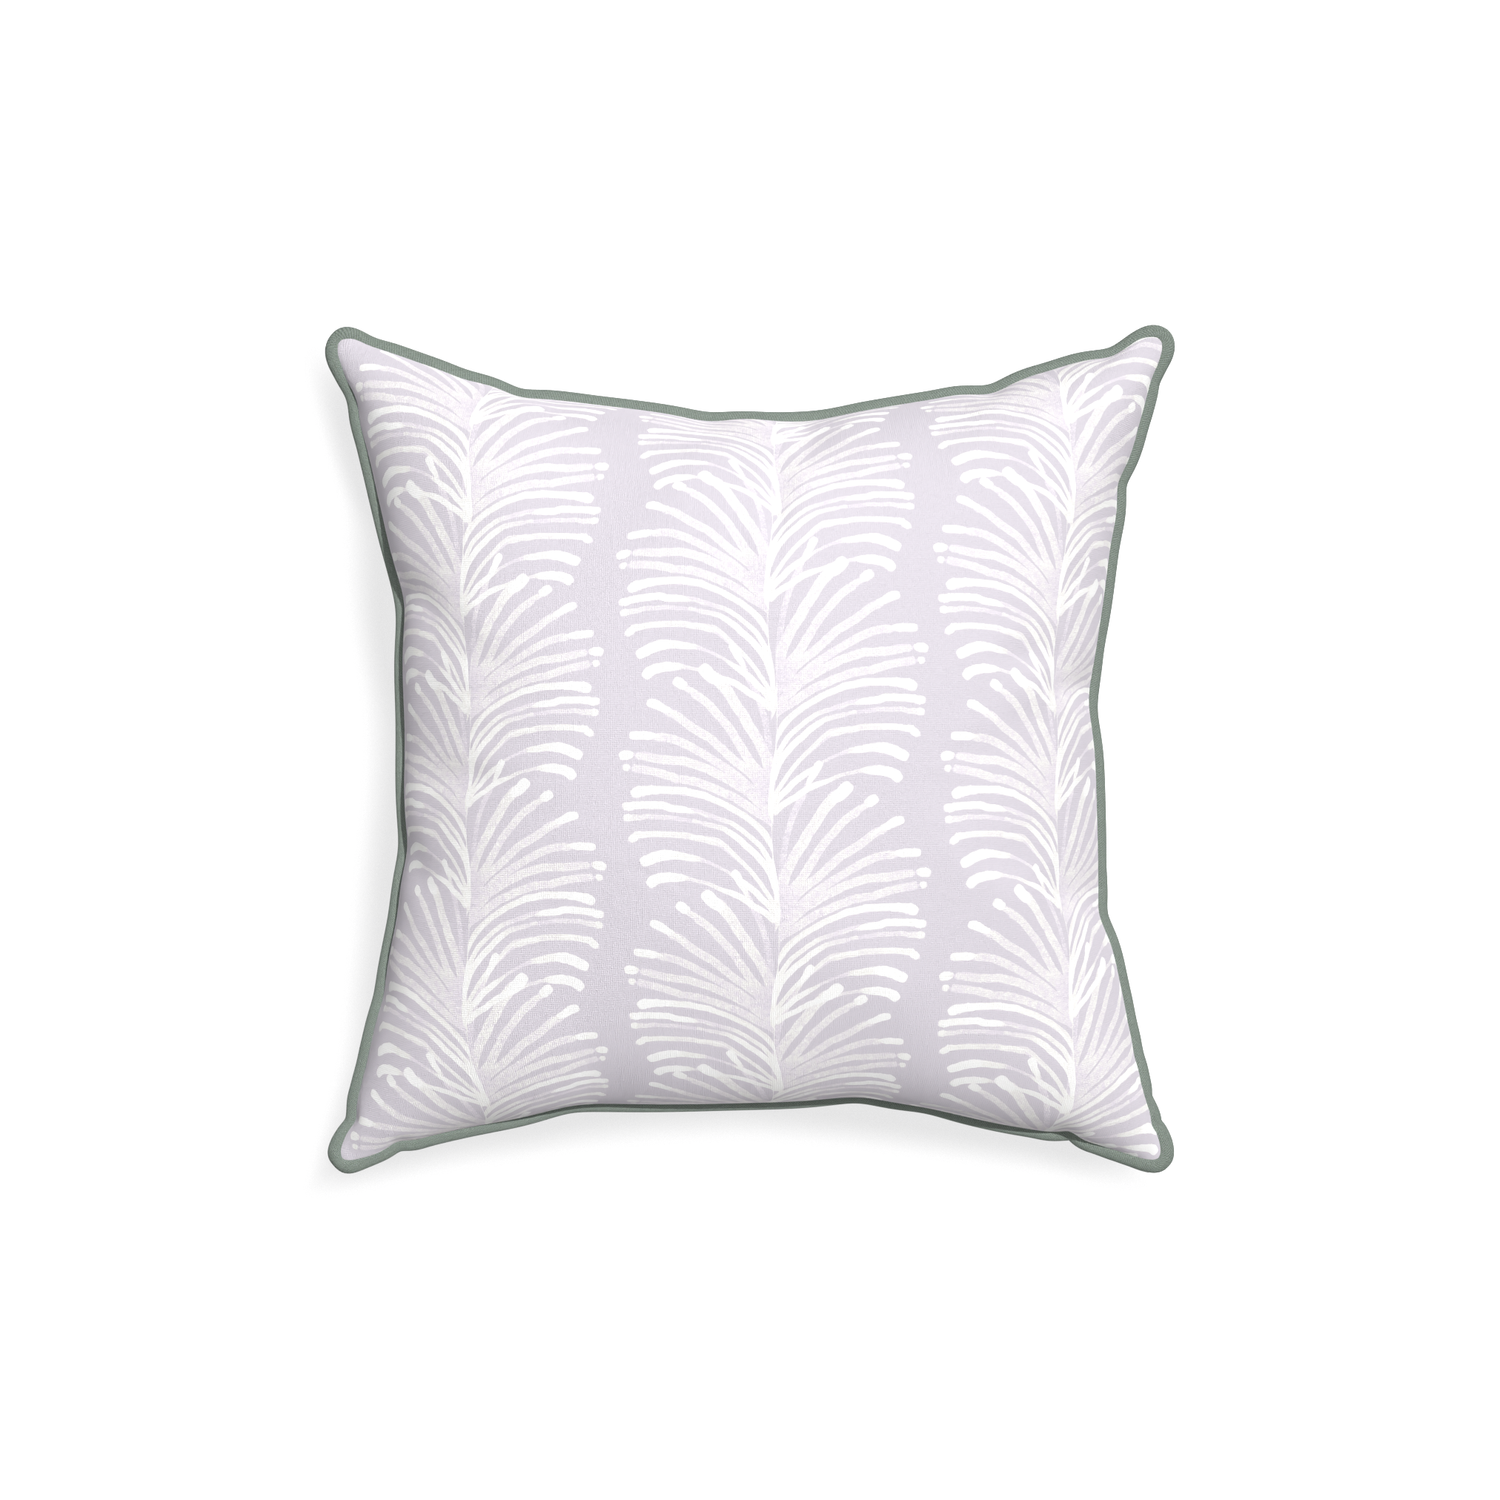 18-square emma lavender custom lavender botanical stripepillow with sage piping on white background